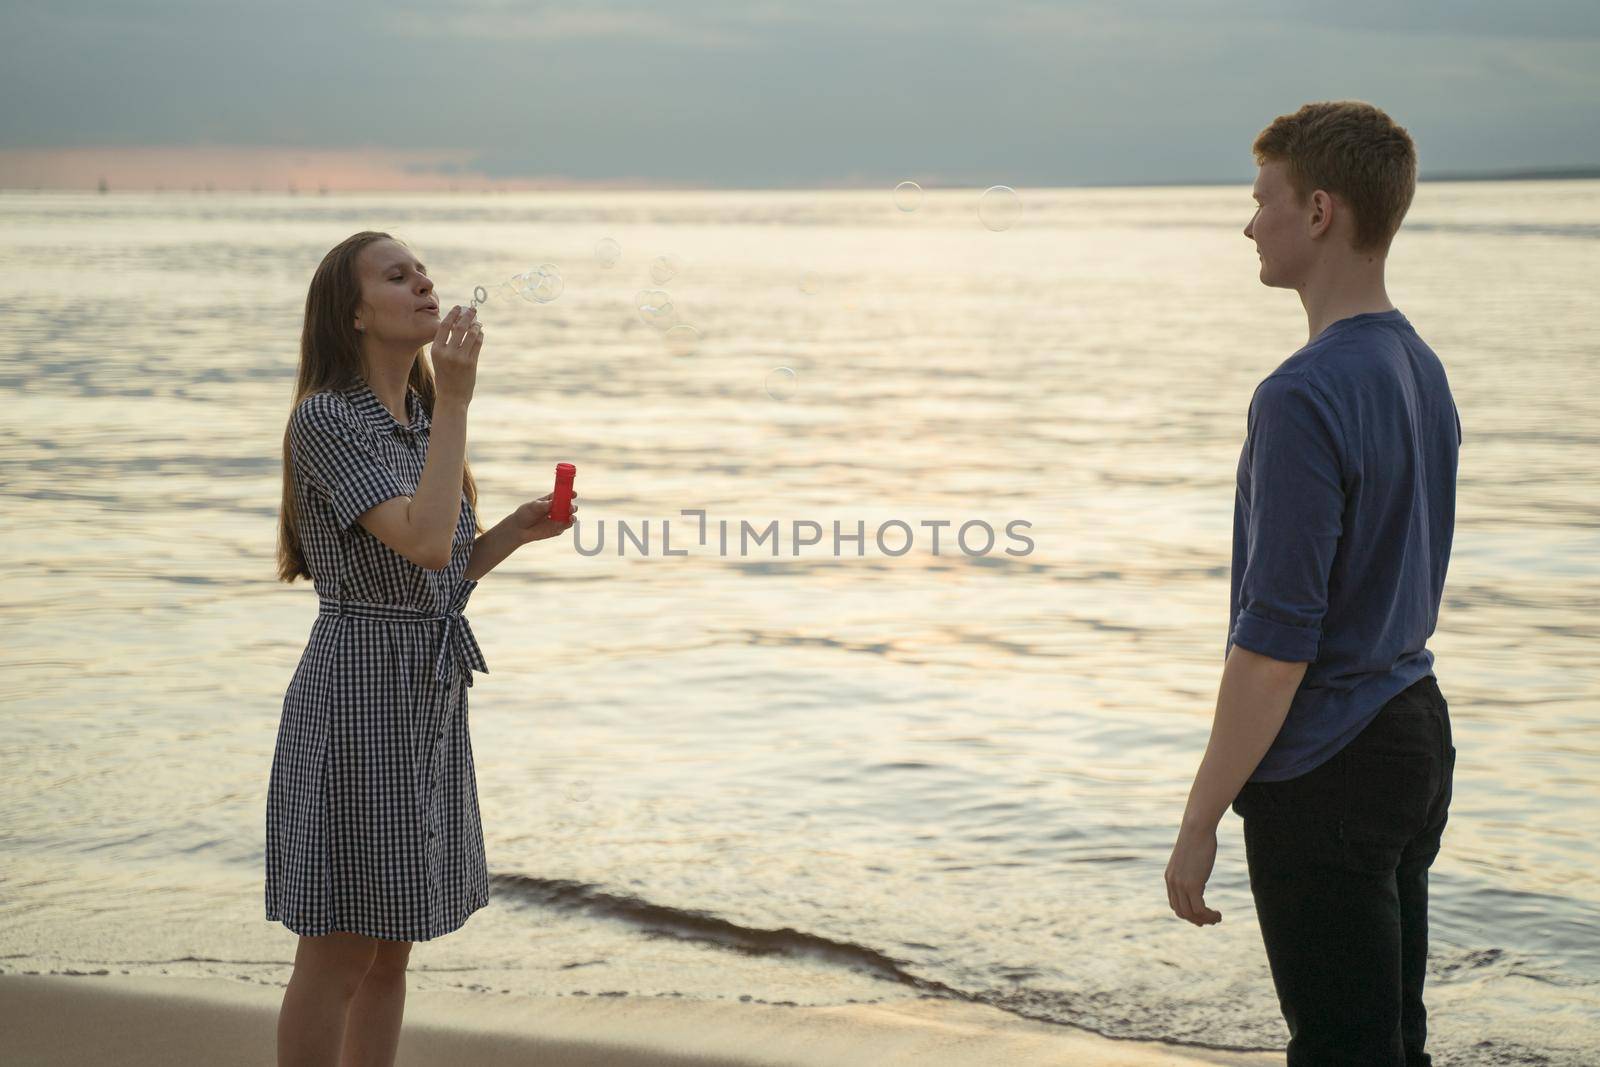 teen couple having fun on beach, girl blow bubbles and boy standing next to her